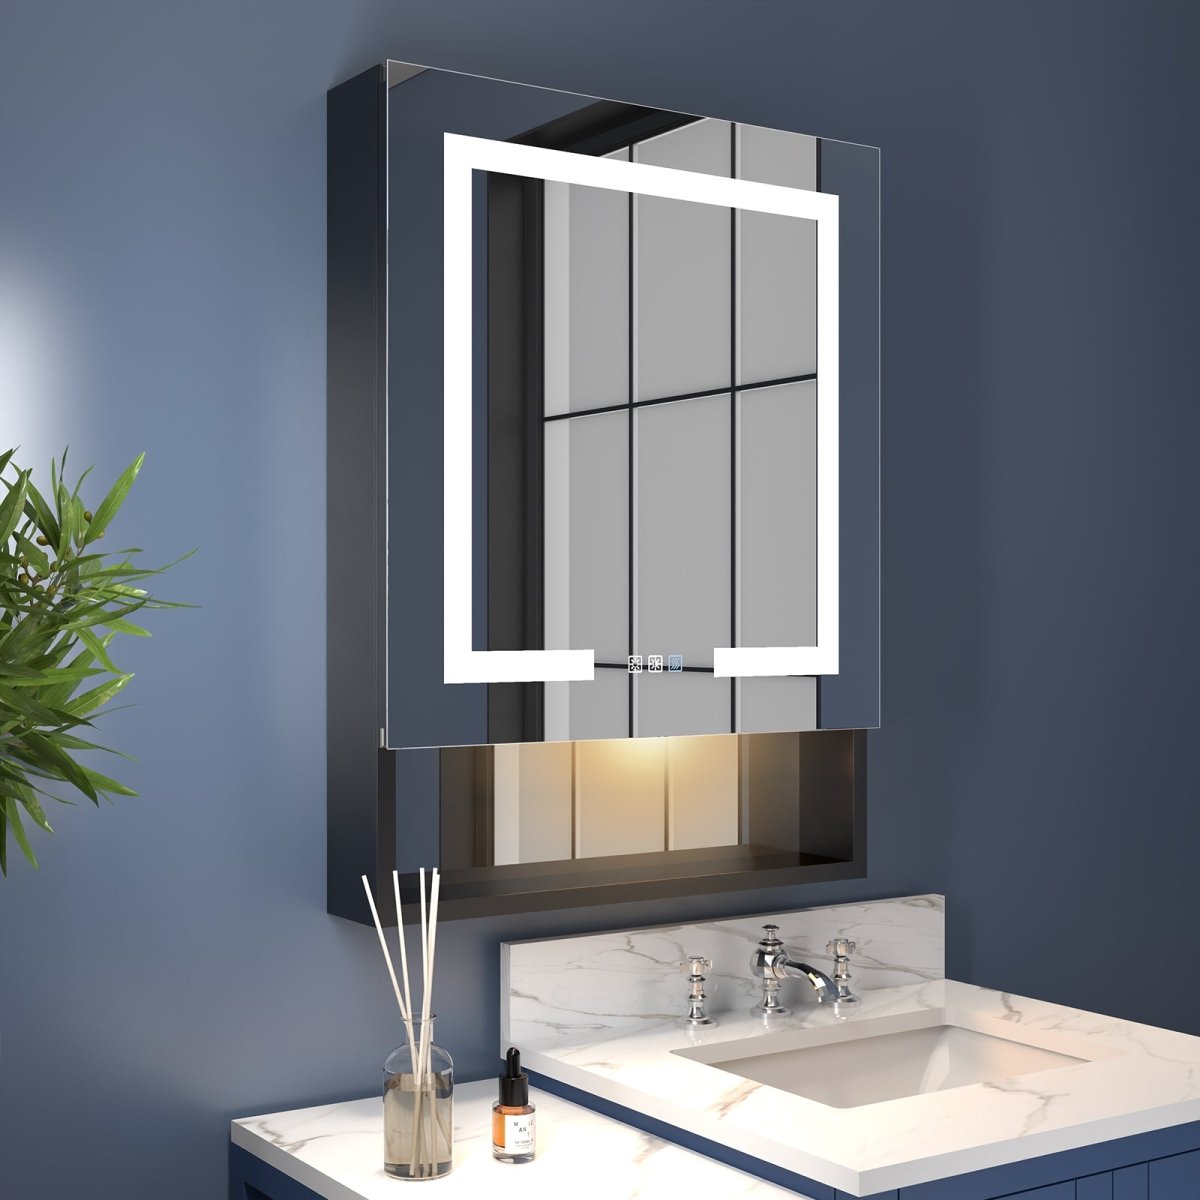 Ample 24" W x 32" H Lighted Black Medicine Cabinet Bathroom Medicine Cabinet with Double Sided Mirror And Lights